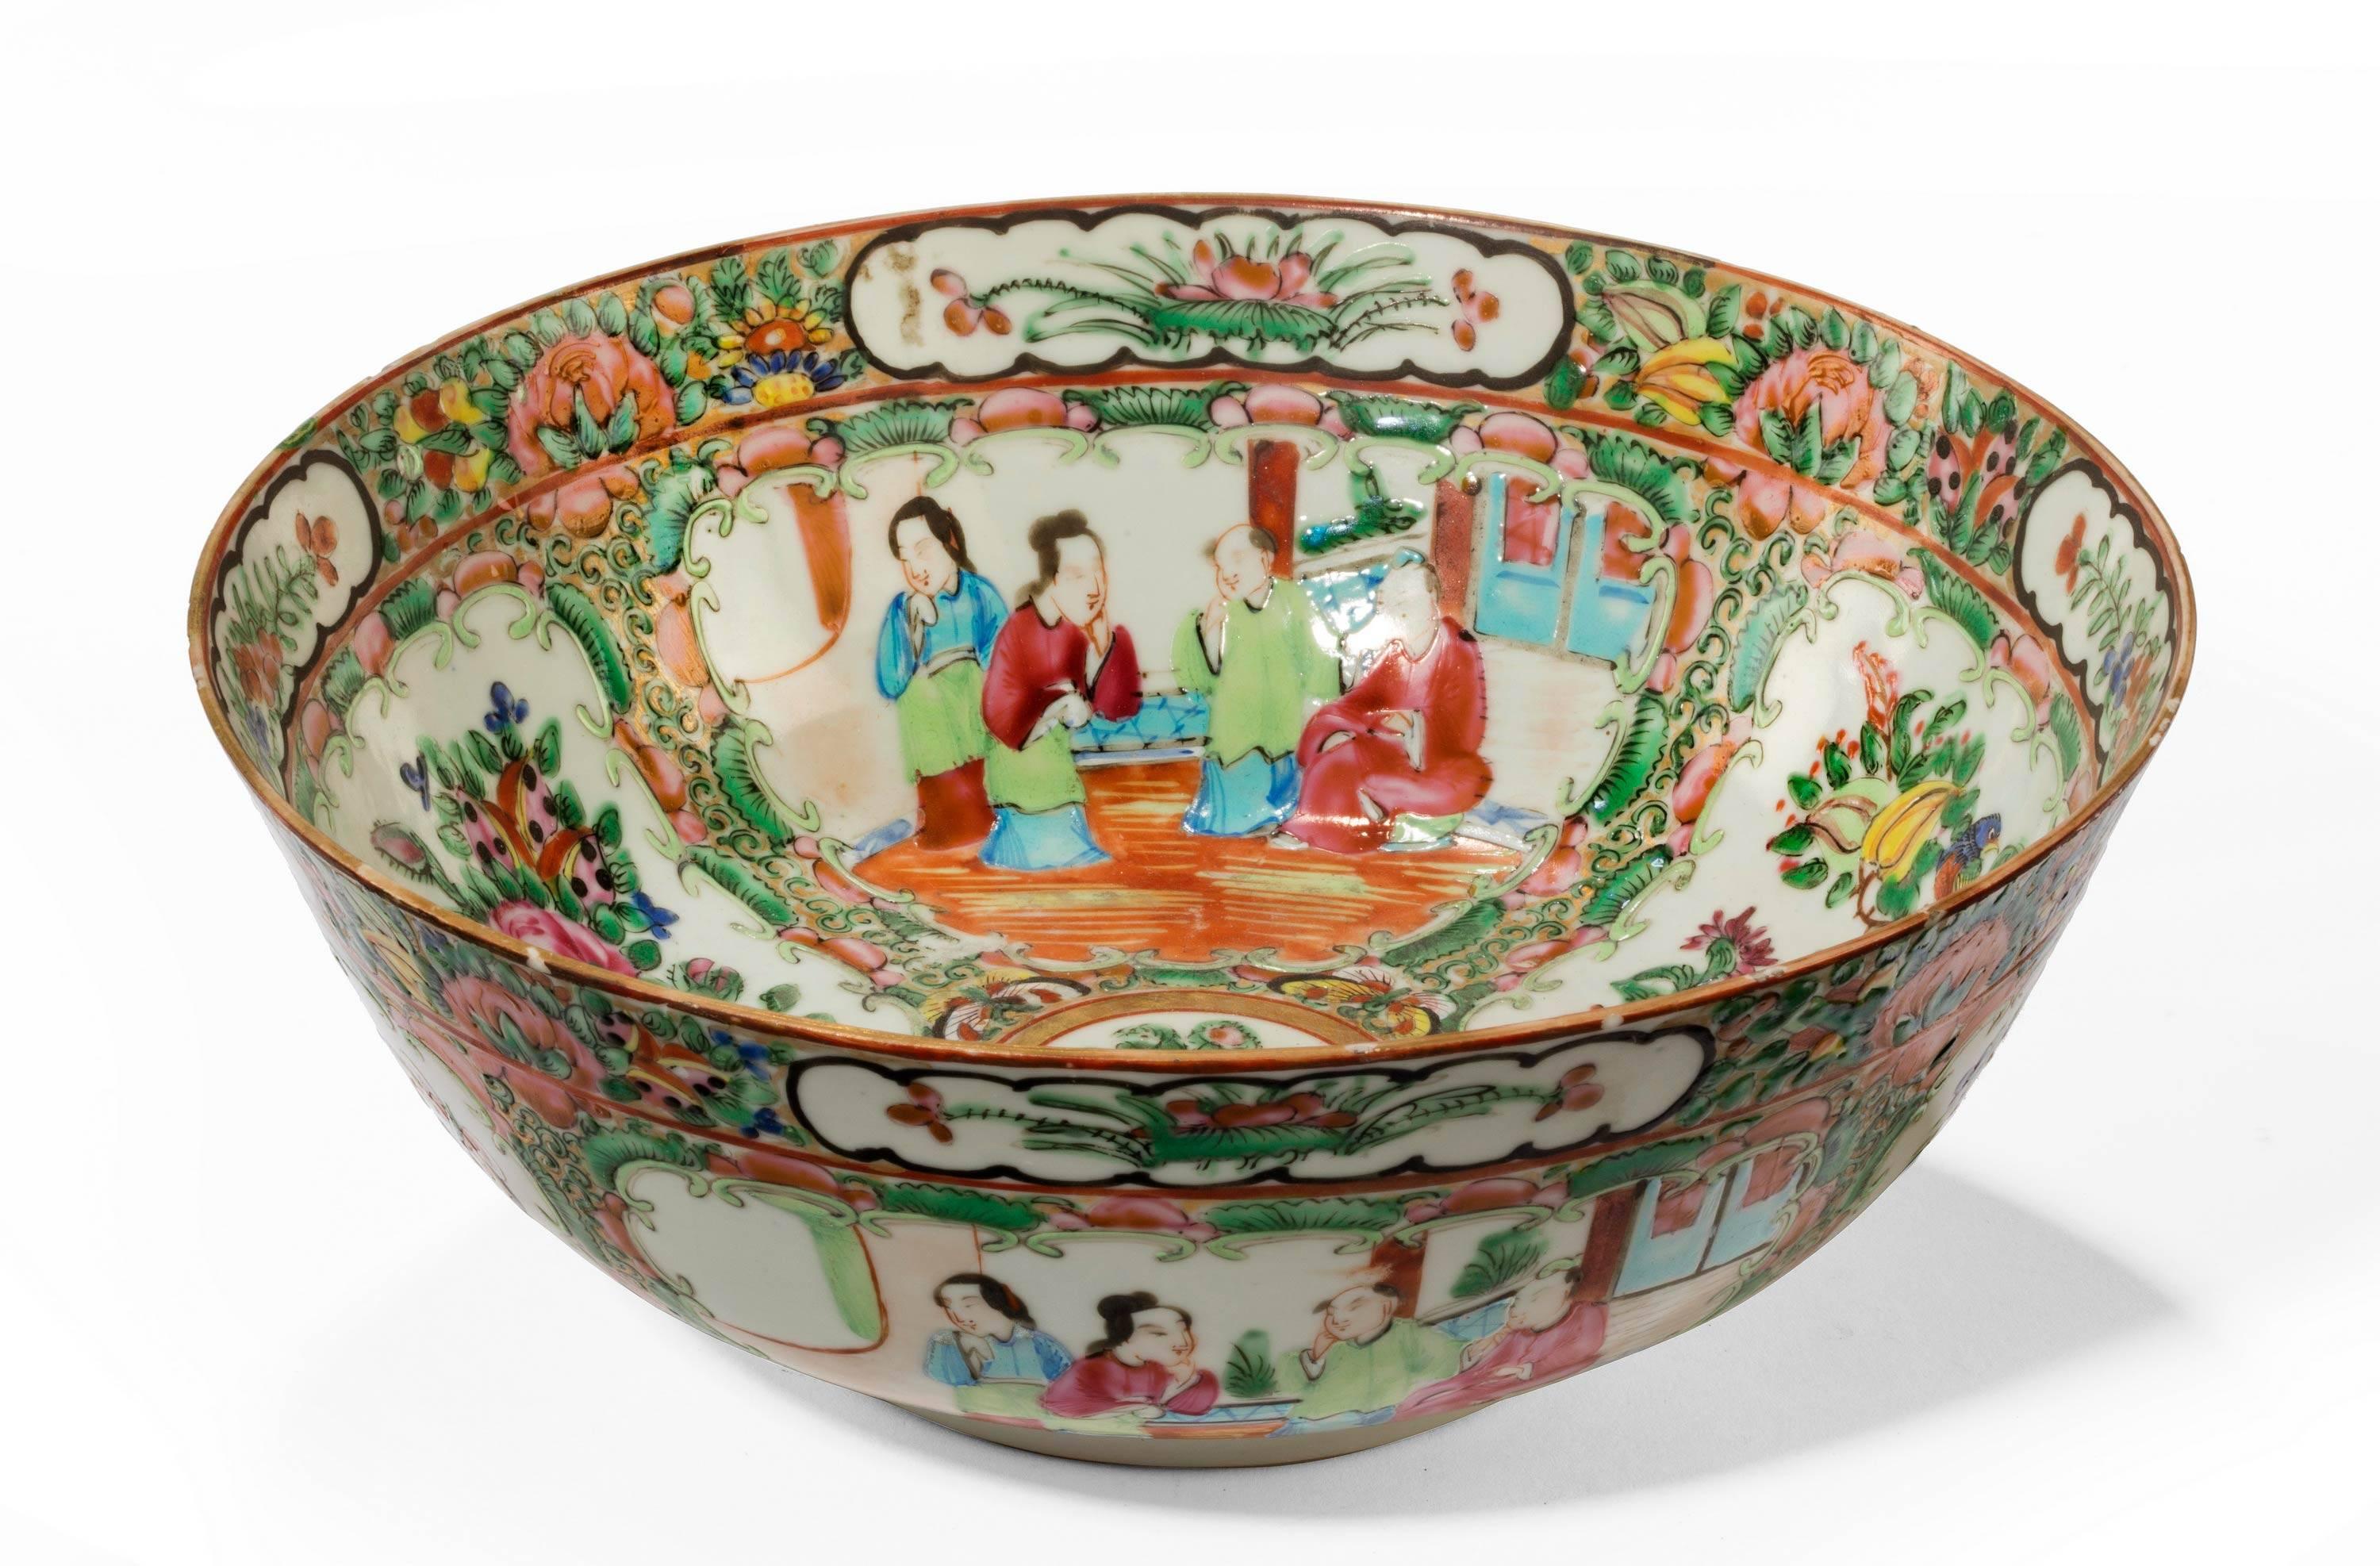 A finely decorated Cantonese enameled porcelain bowl. Occasionally referred to as famille verte. The interior heavily decorated with court scenes and reserved panels of flowers and foliage. The exterior with similar. Excellent unrubbed condition.